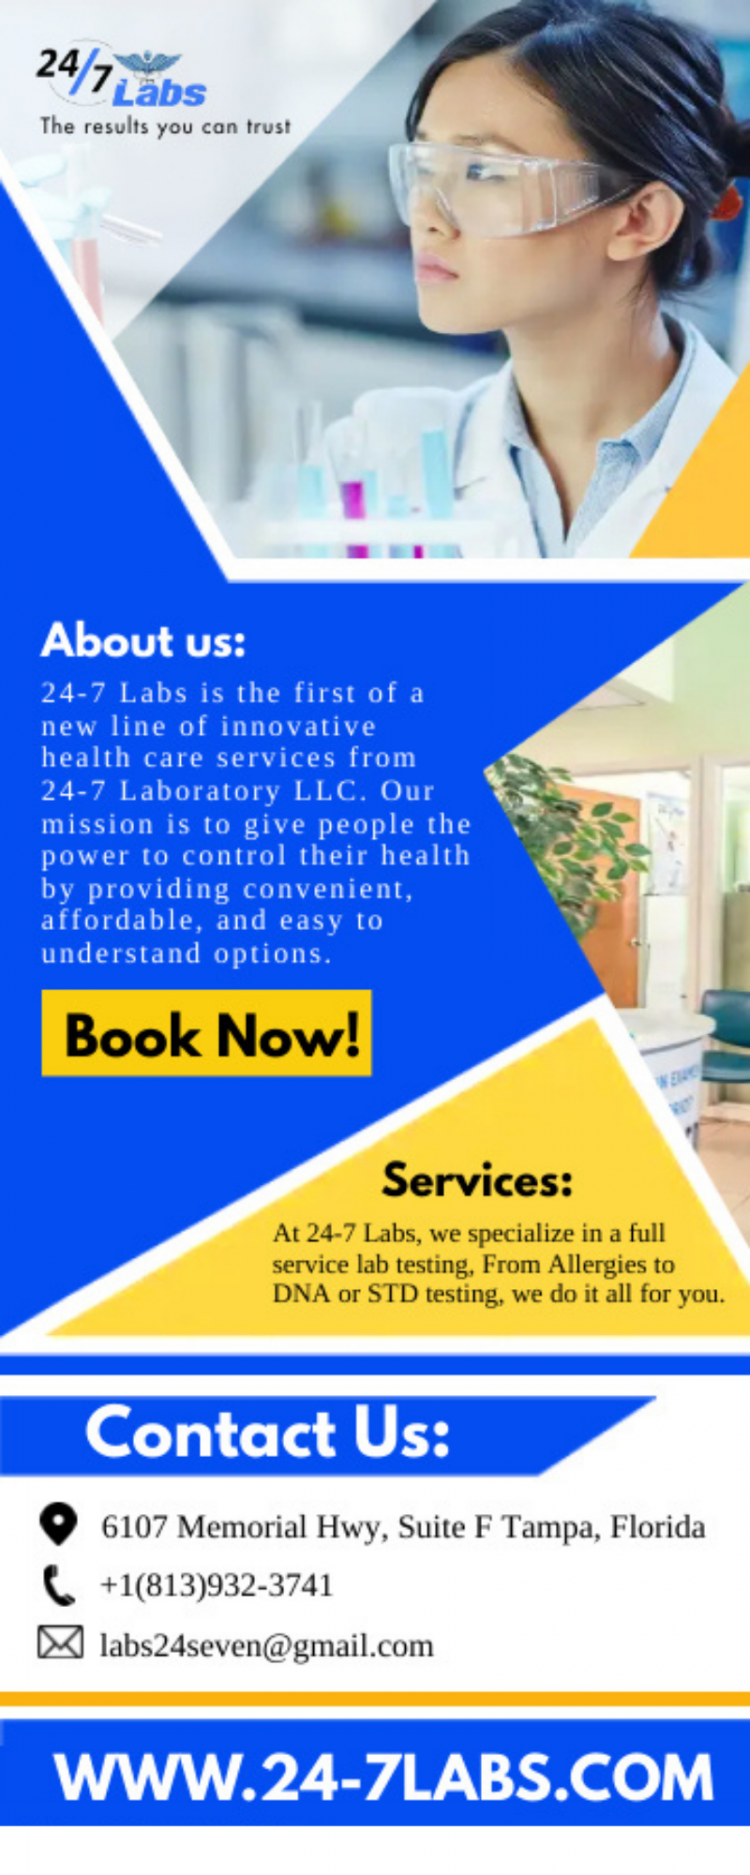 24-7 Labs is the first of a new line of innovative health care services from 24-7 Laboratory LLC. Our mission is to give people the power to control their health by providing convenient, affordable, and easy to understand options. 
https://www.24-7labs.com/